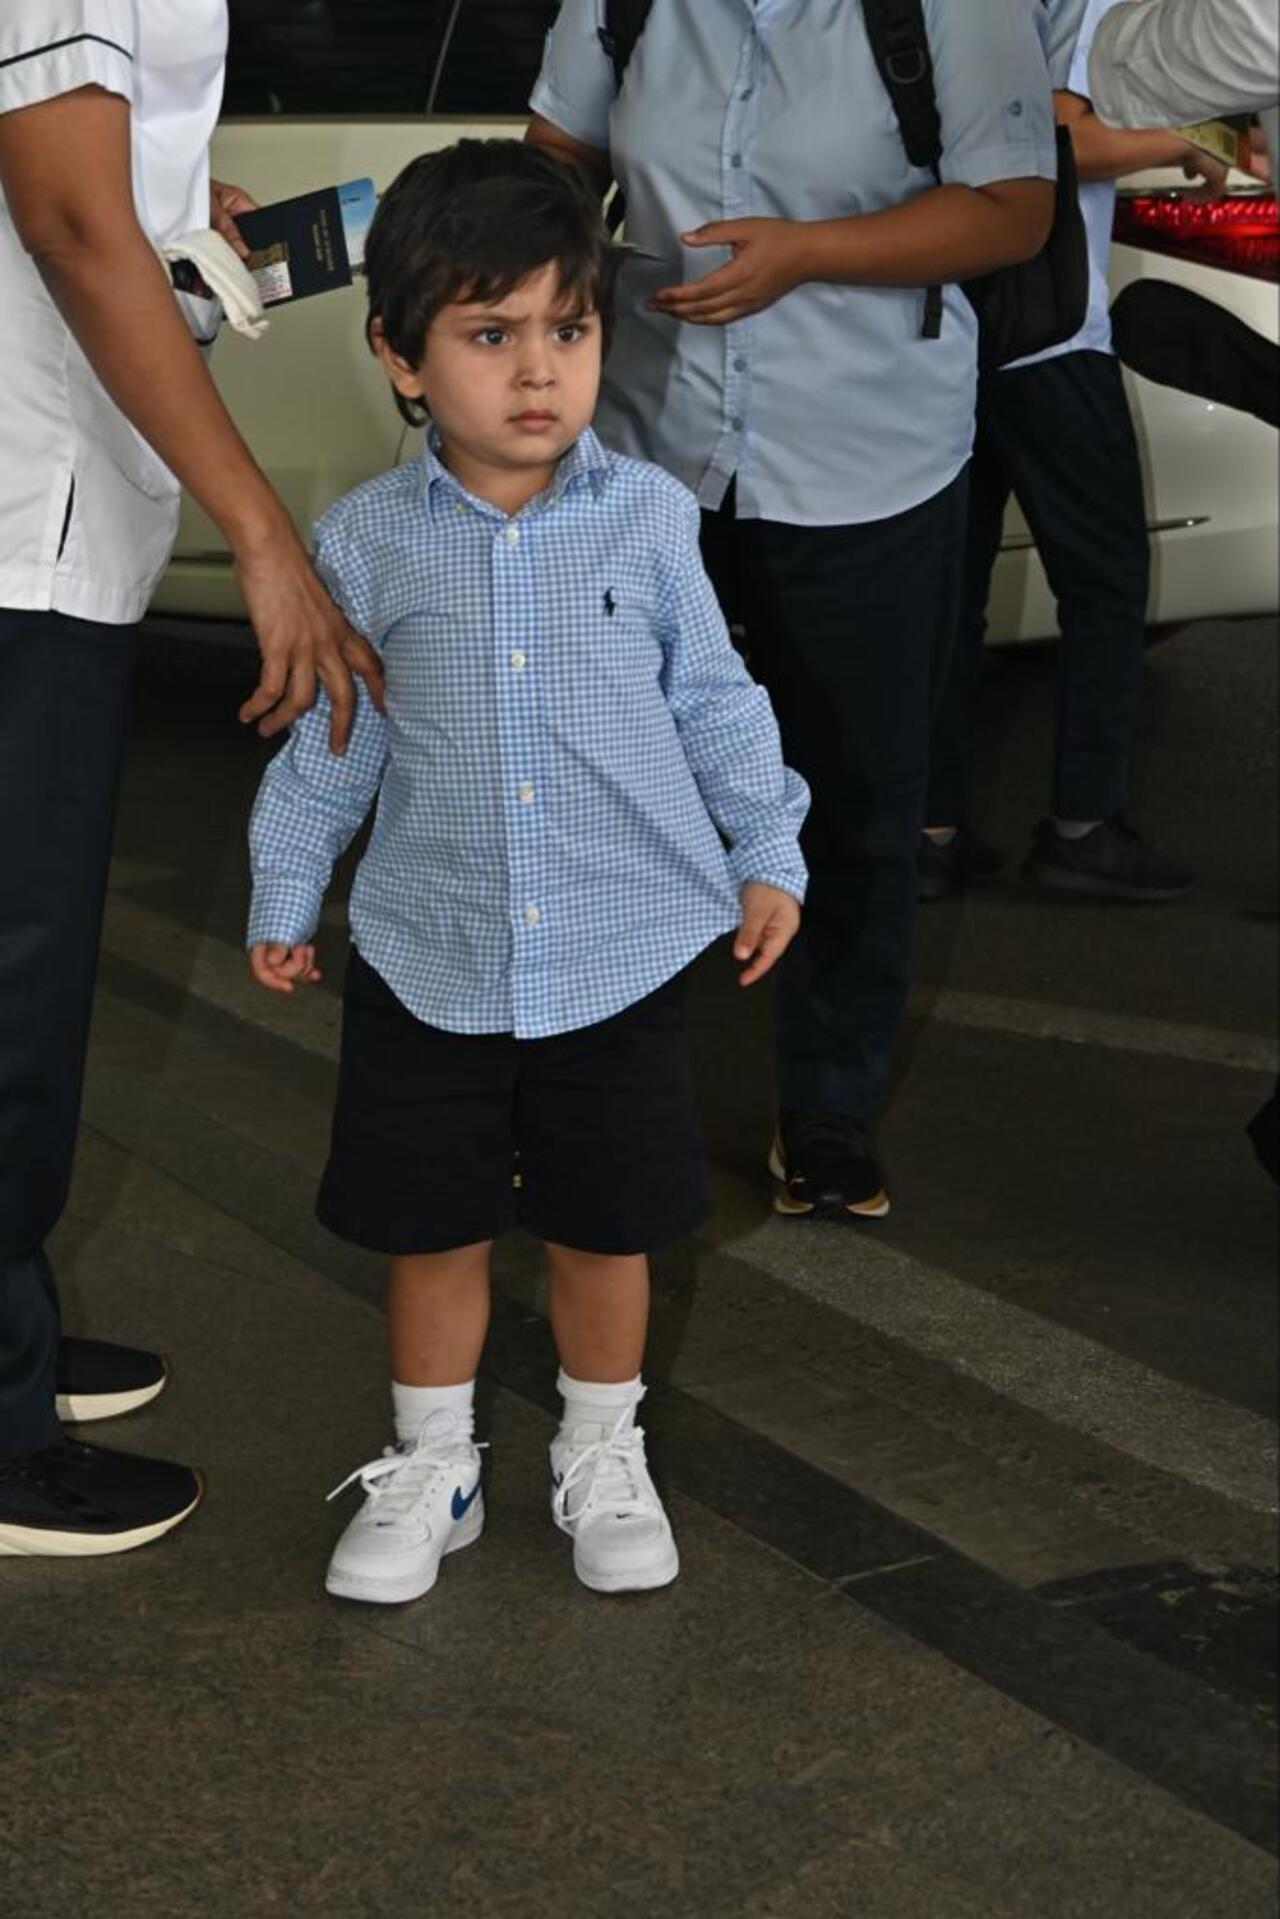 Little Jeh gets clicked by the paps at the airport